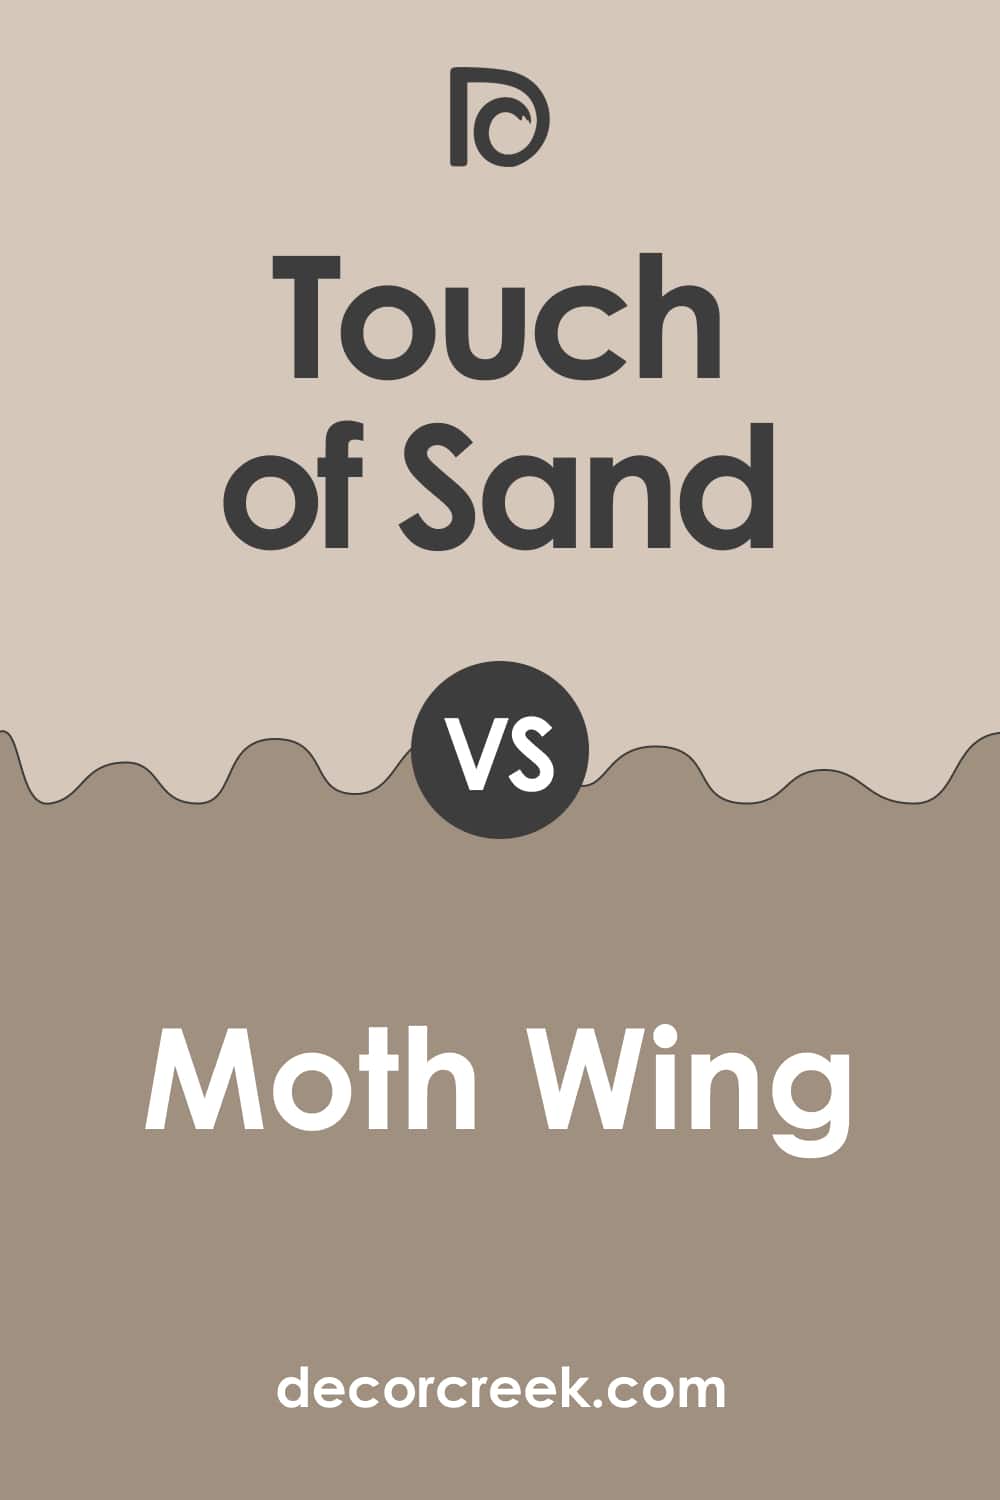 Touch of Sand vs Moth Wing